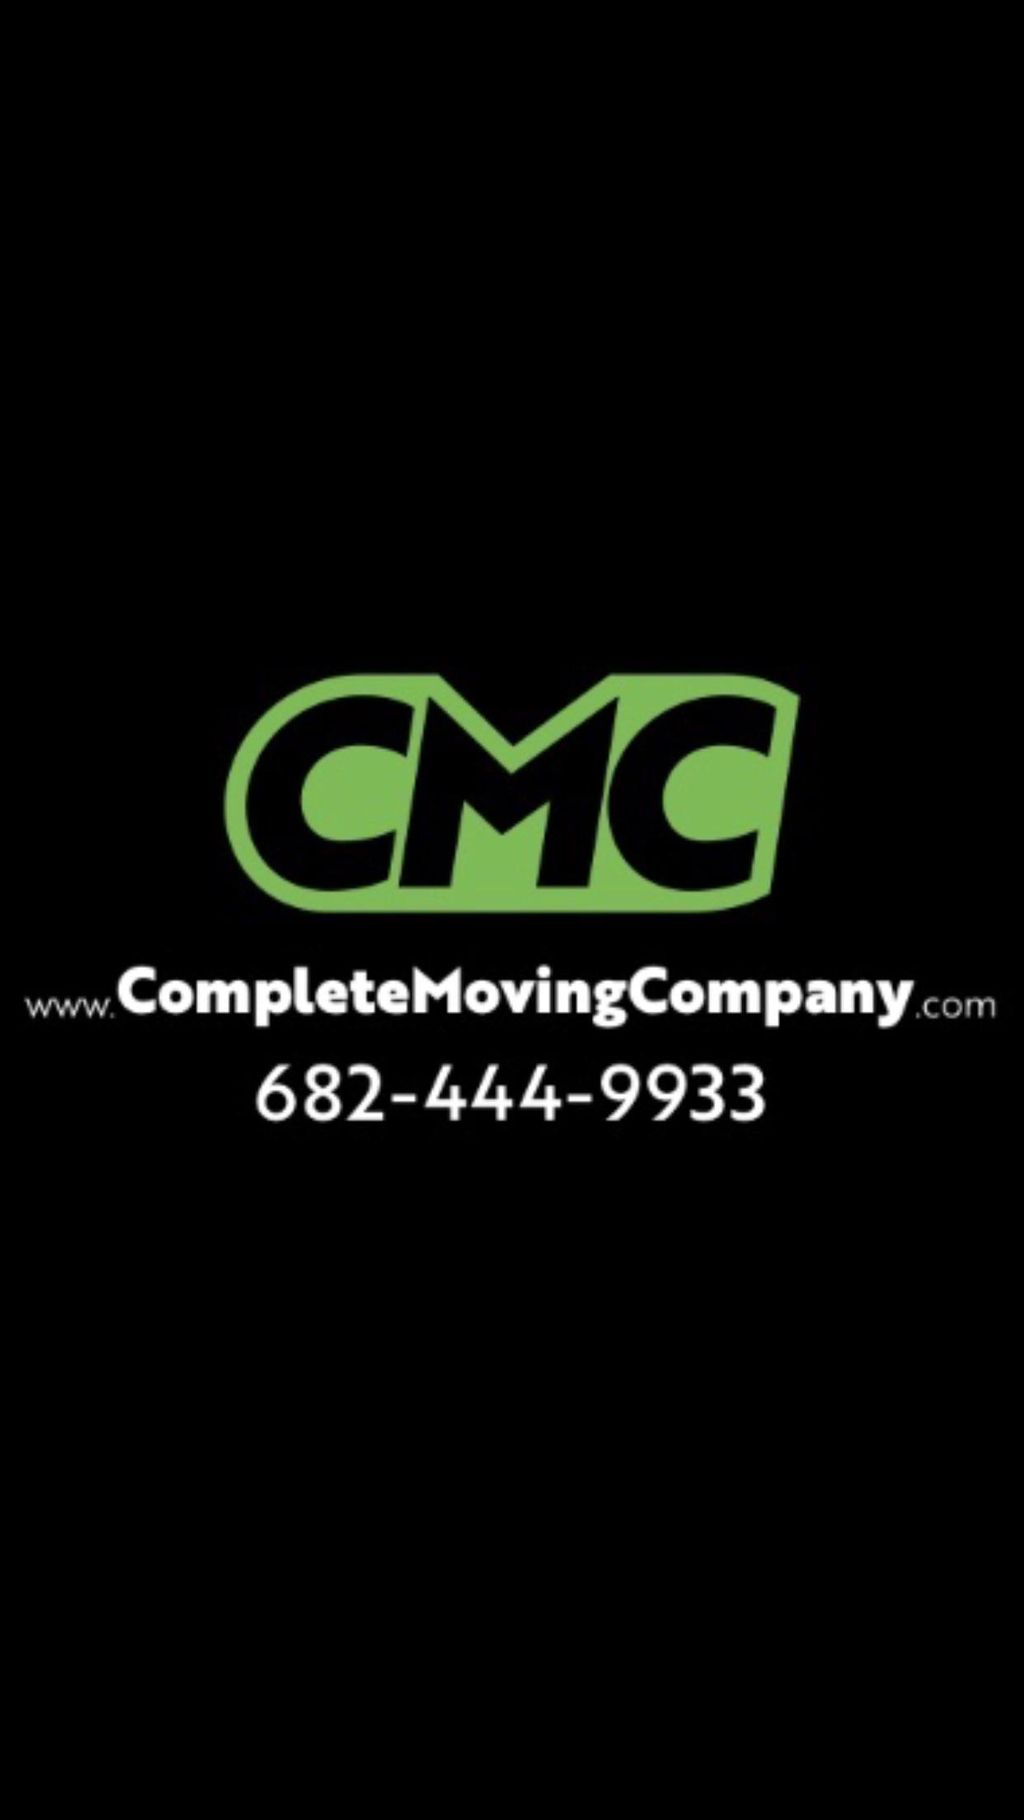 Complete Moving Company